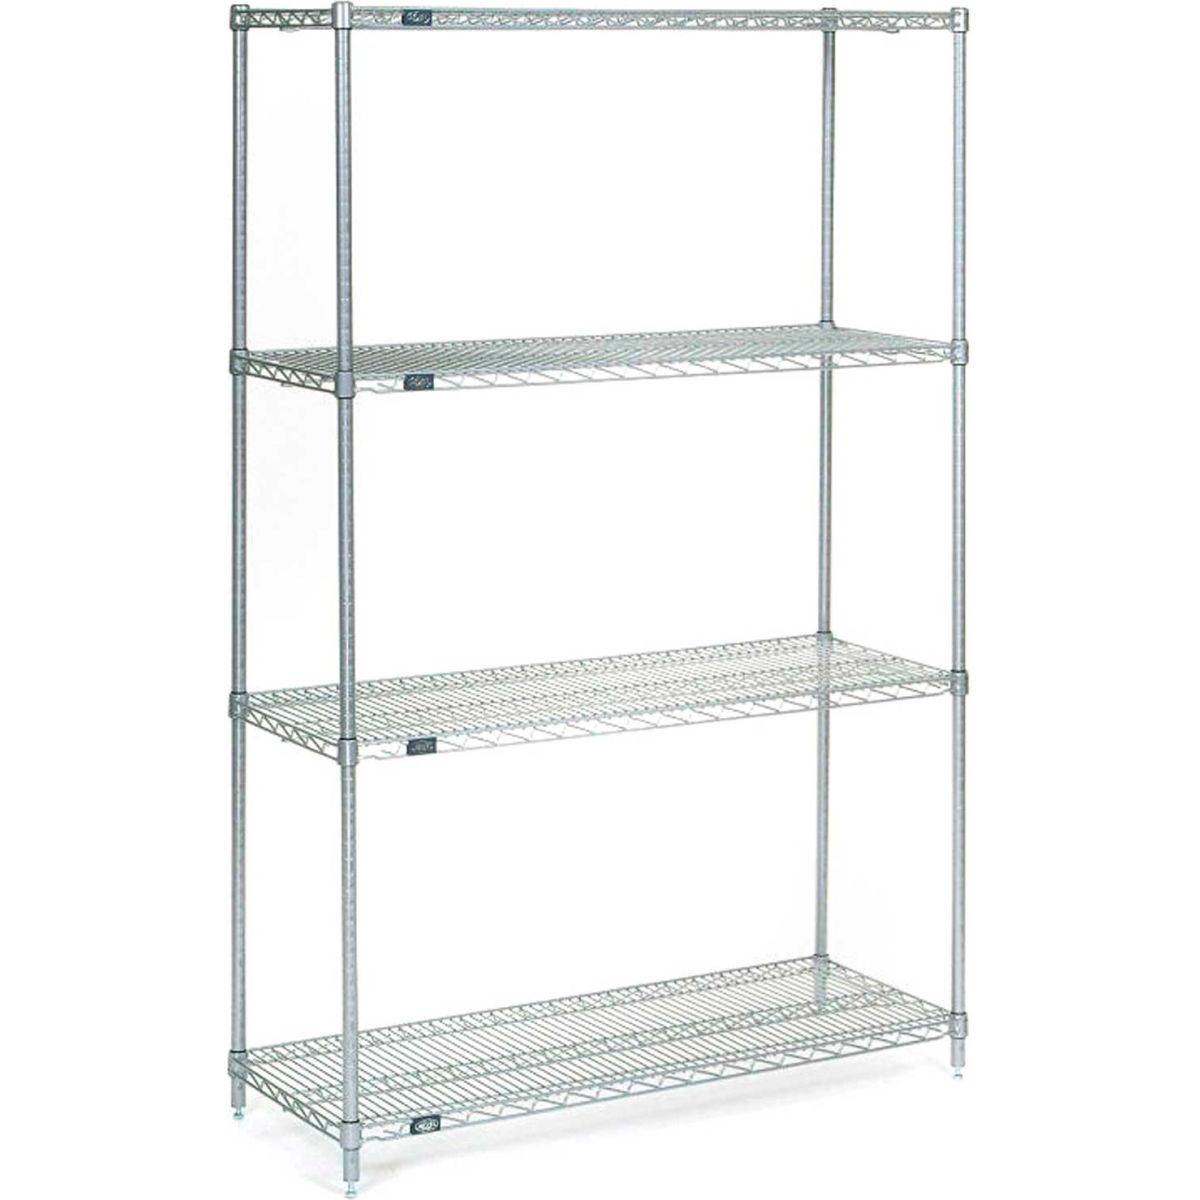 Picture of Global Industrial 14426S 63 x 42 x 14 in. Nexel Stainless Steel Starter Wire Shelving